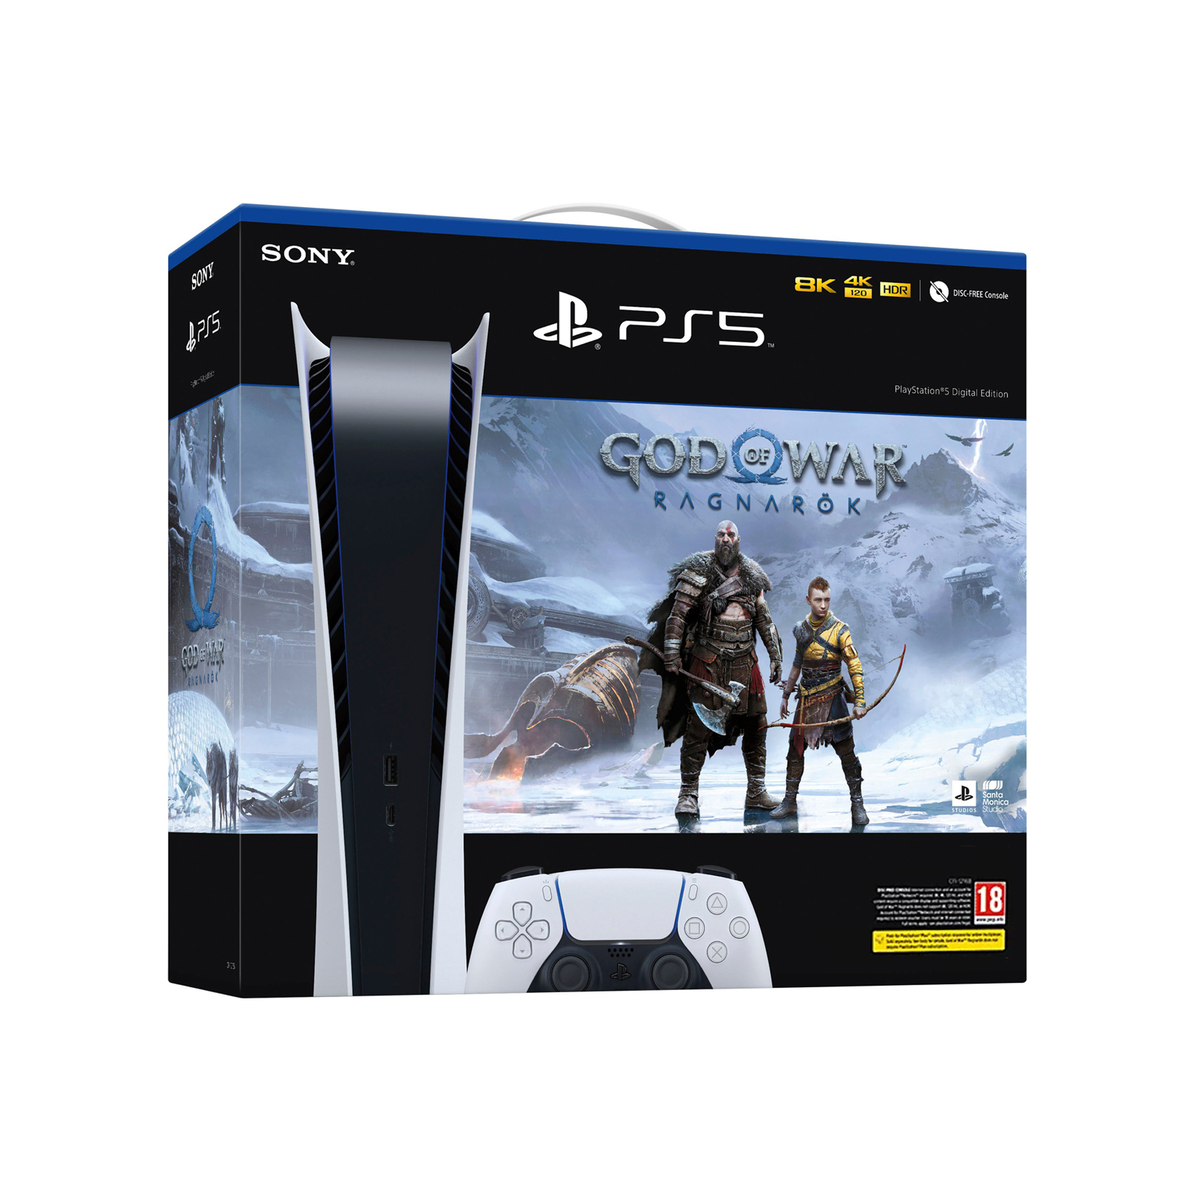 Buy Online Sony PlayStation PS5 Disc Console with EA Sports FC 24 Bundle –  Sony World - Qatar